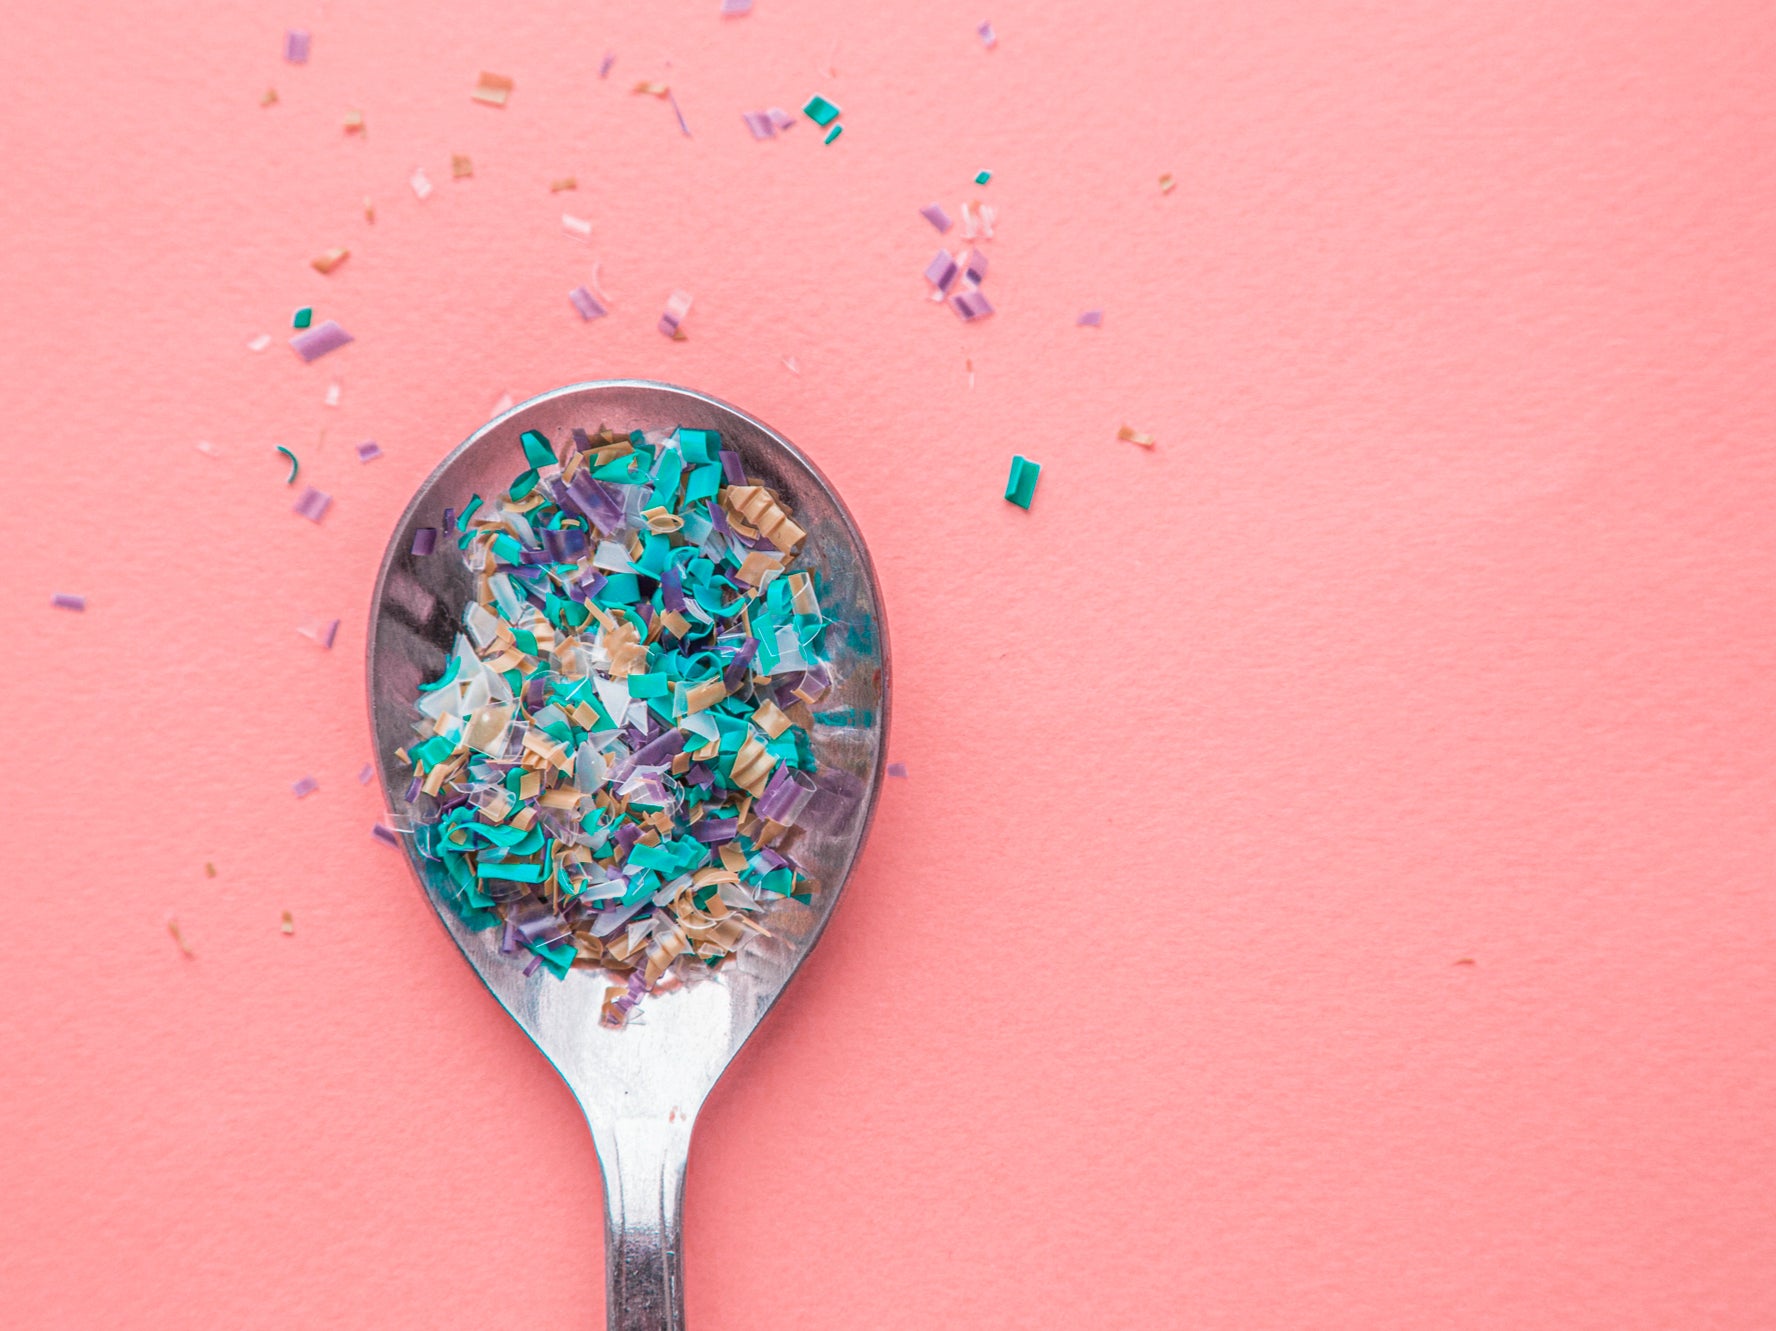 A spoon carrying microplastics